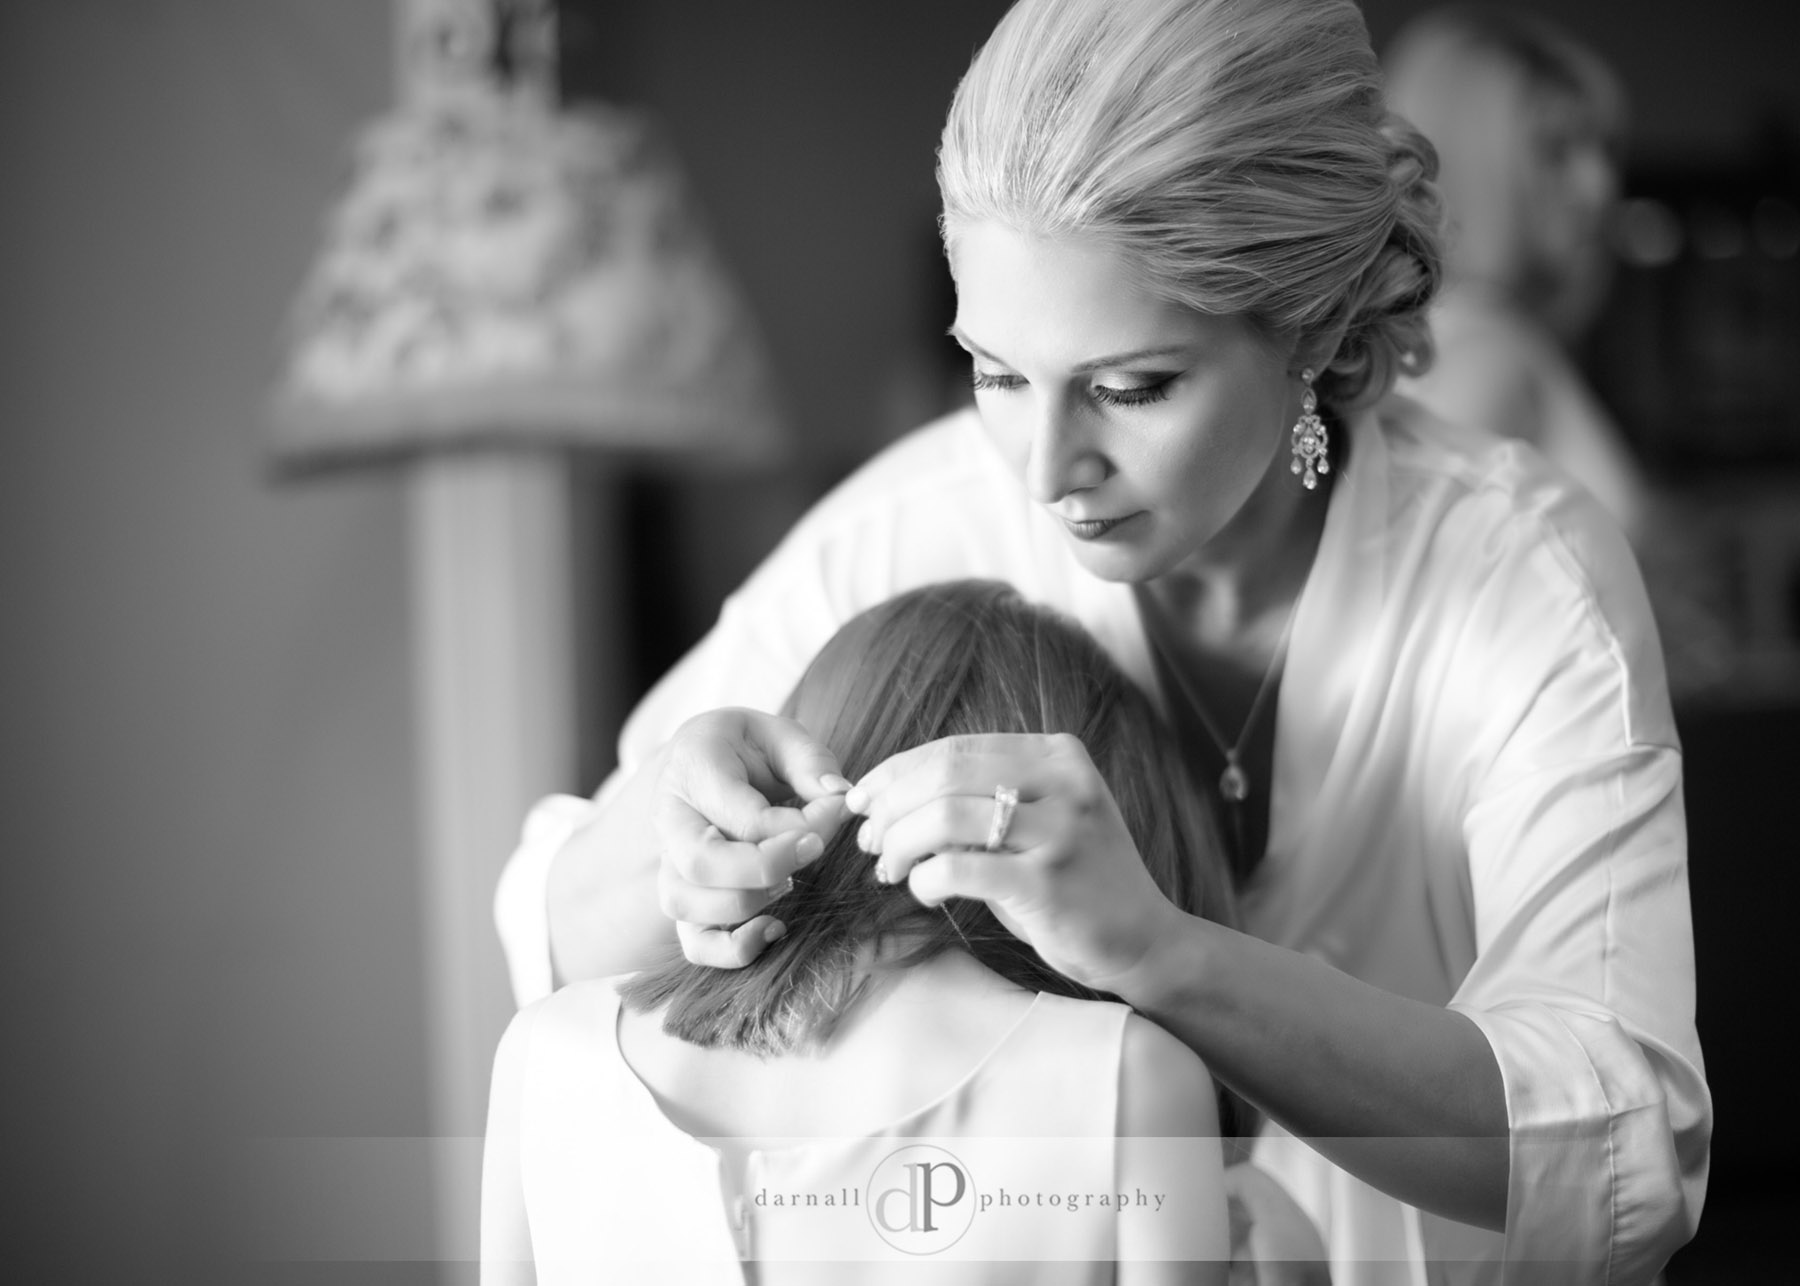 Bride and flower girl getting ready